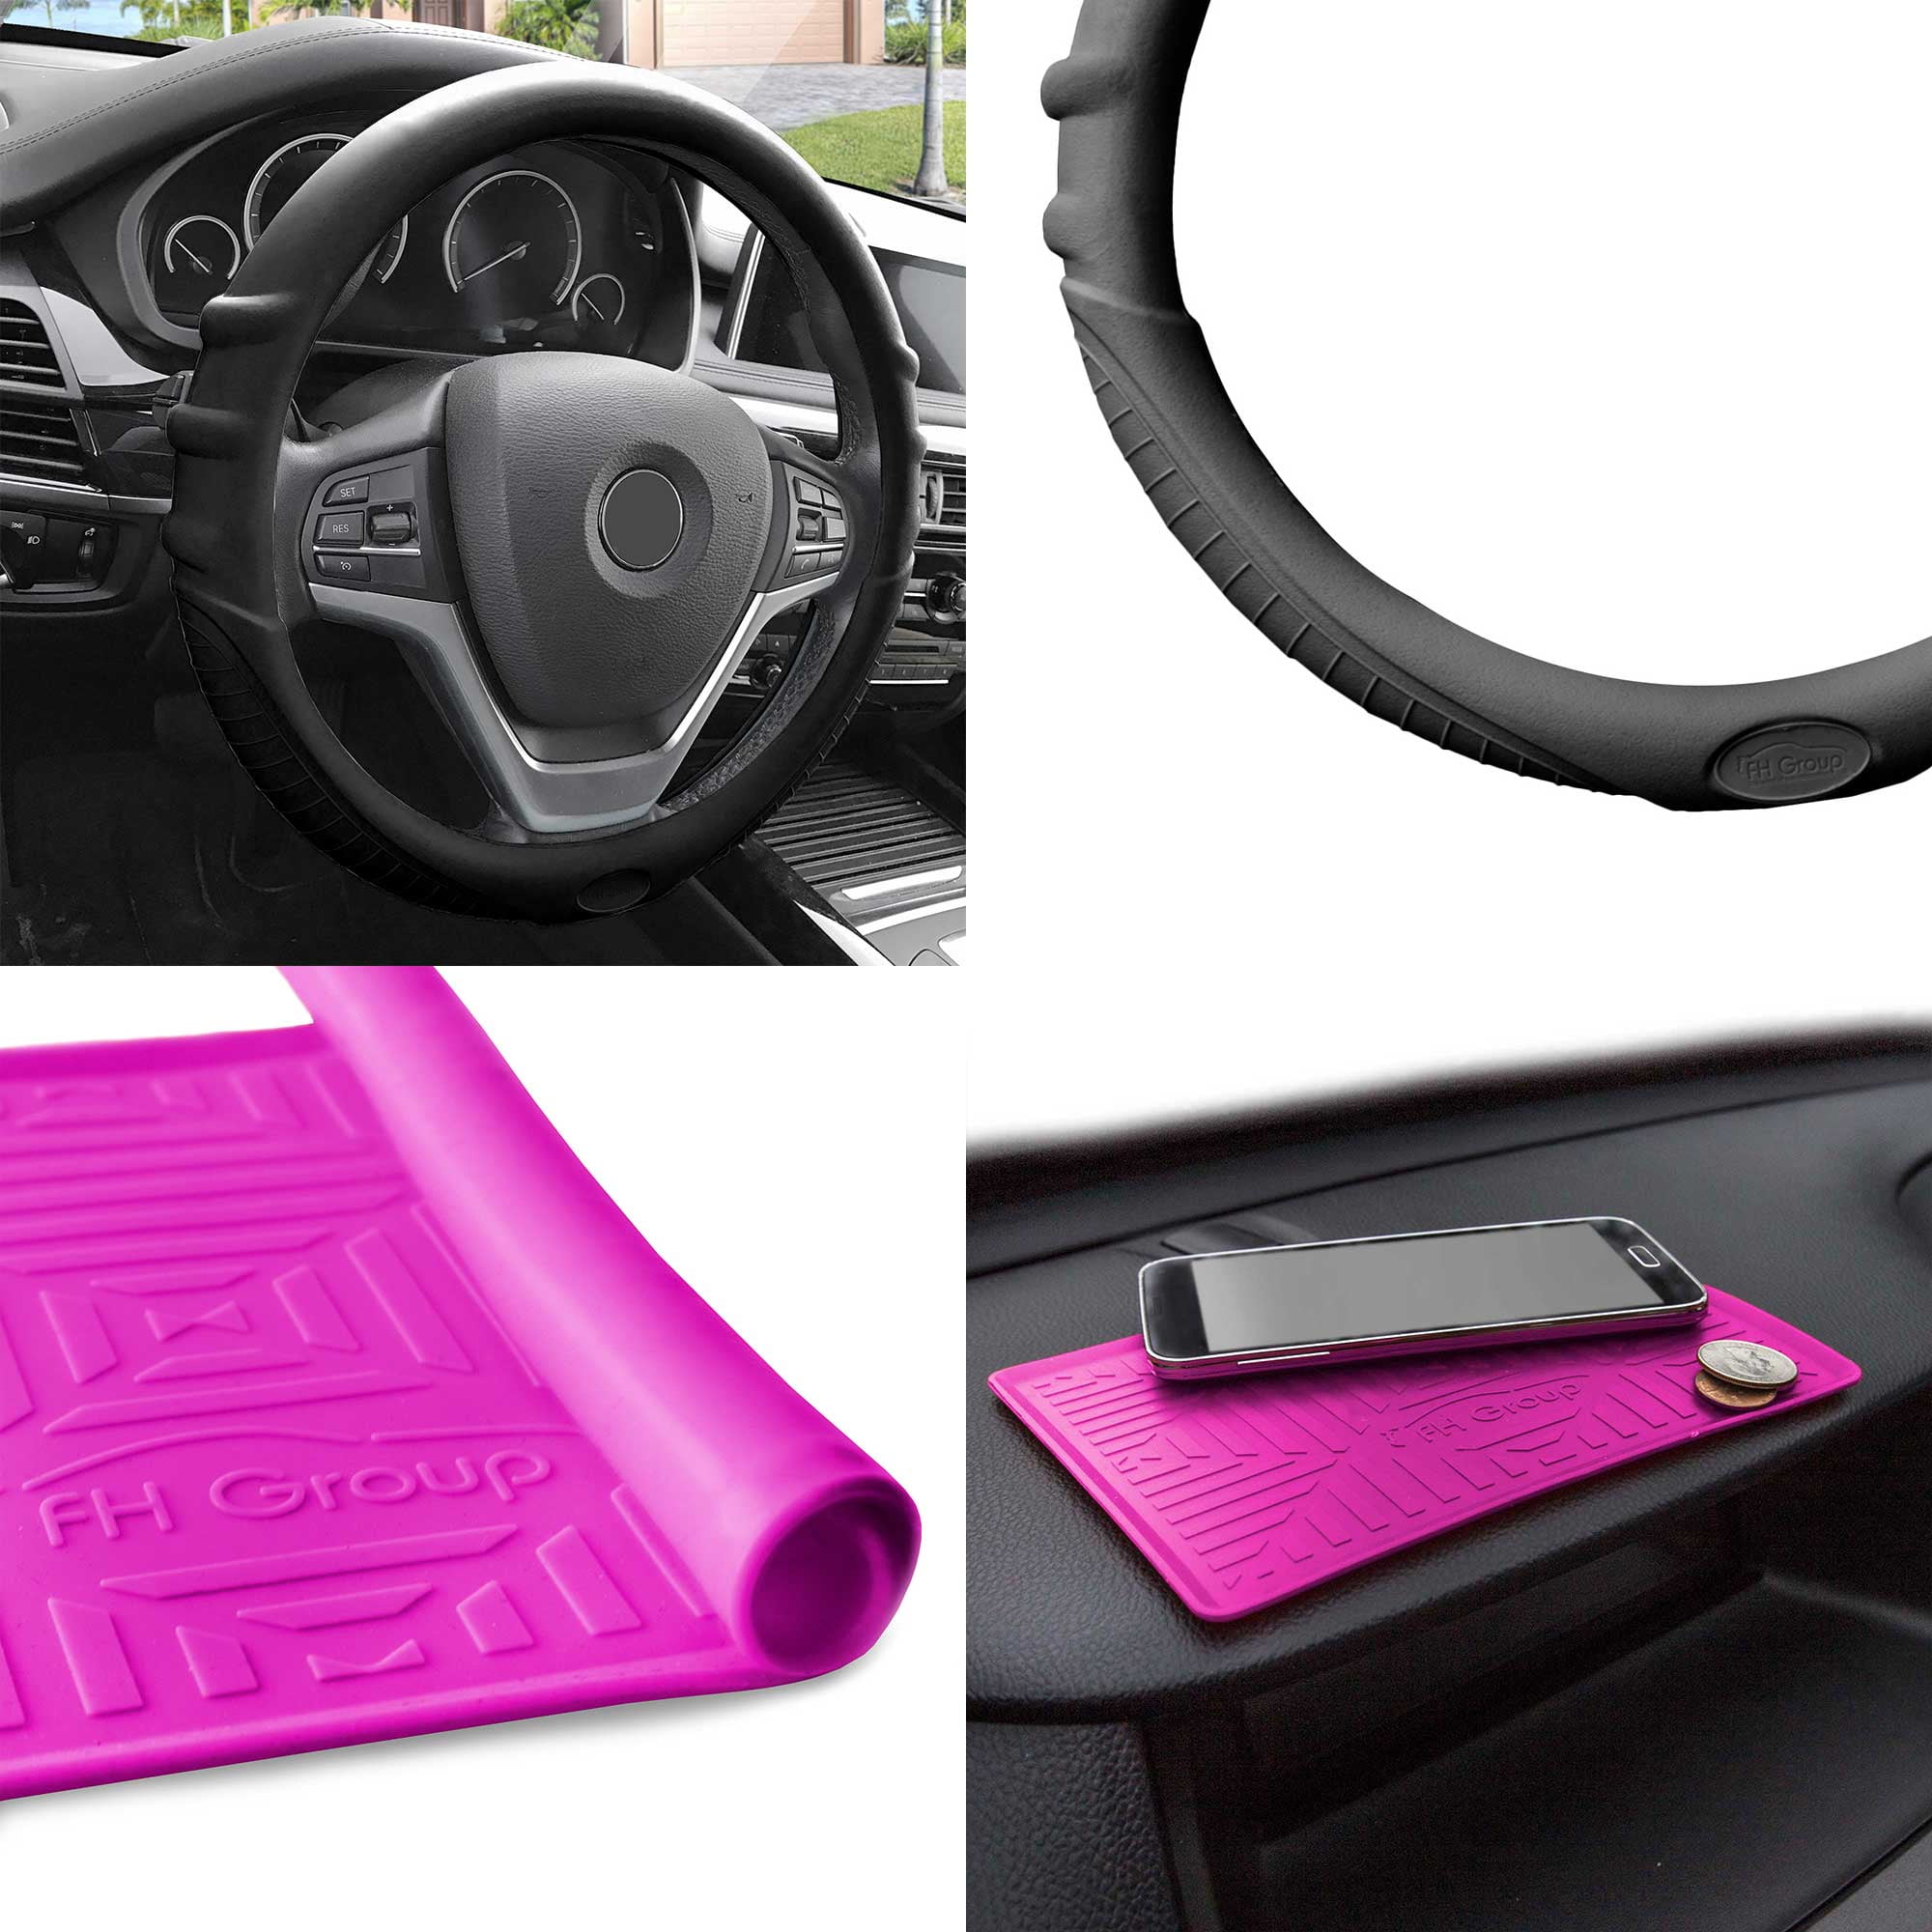 FH Group FH3001MAGENTA Magenta Steering Wheel Cover Silicone Snake Pattern Massaging Grip in Color-Fit Most Car Truck SUV or Van